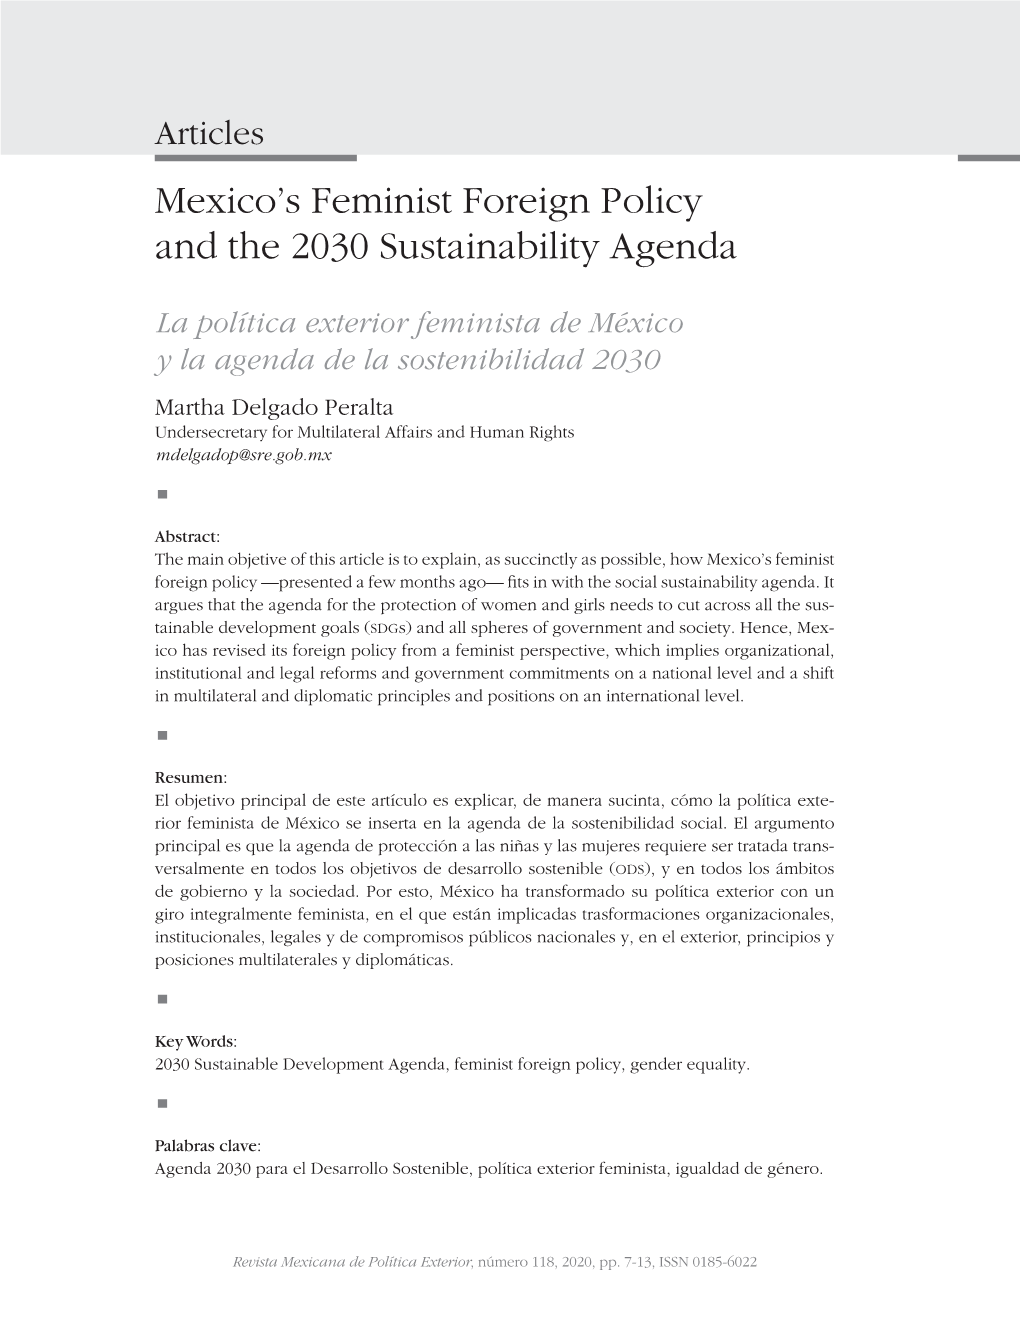 Mexico's Feminist Foreign Policy and the 2030 Sustainability Agenda